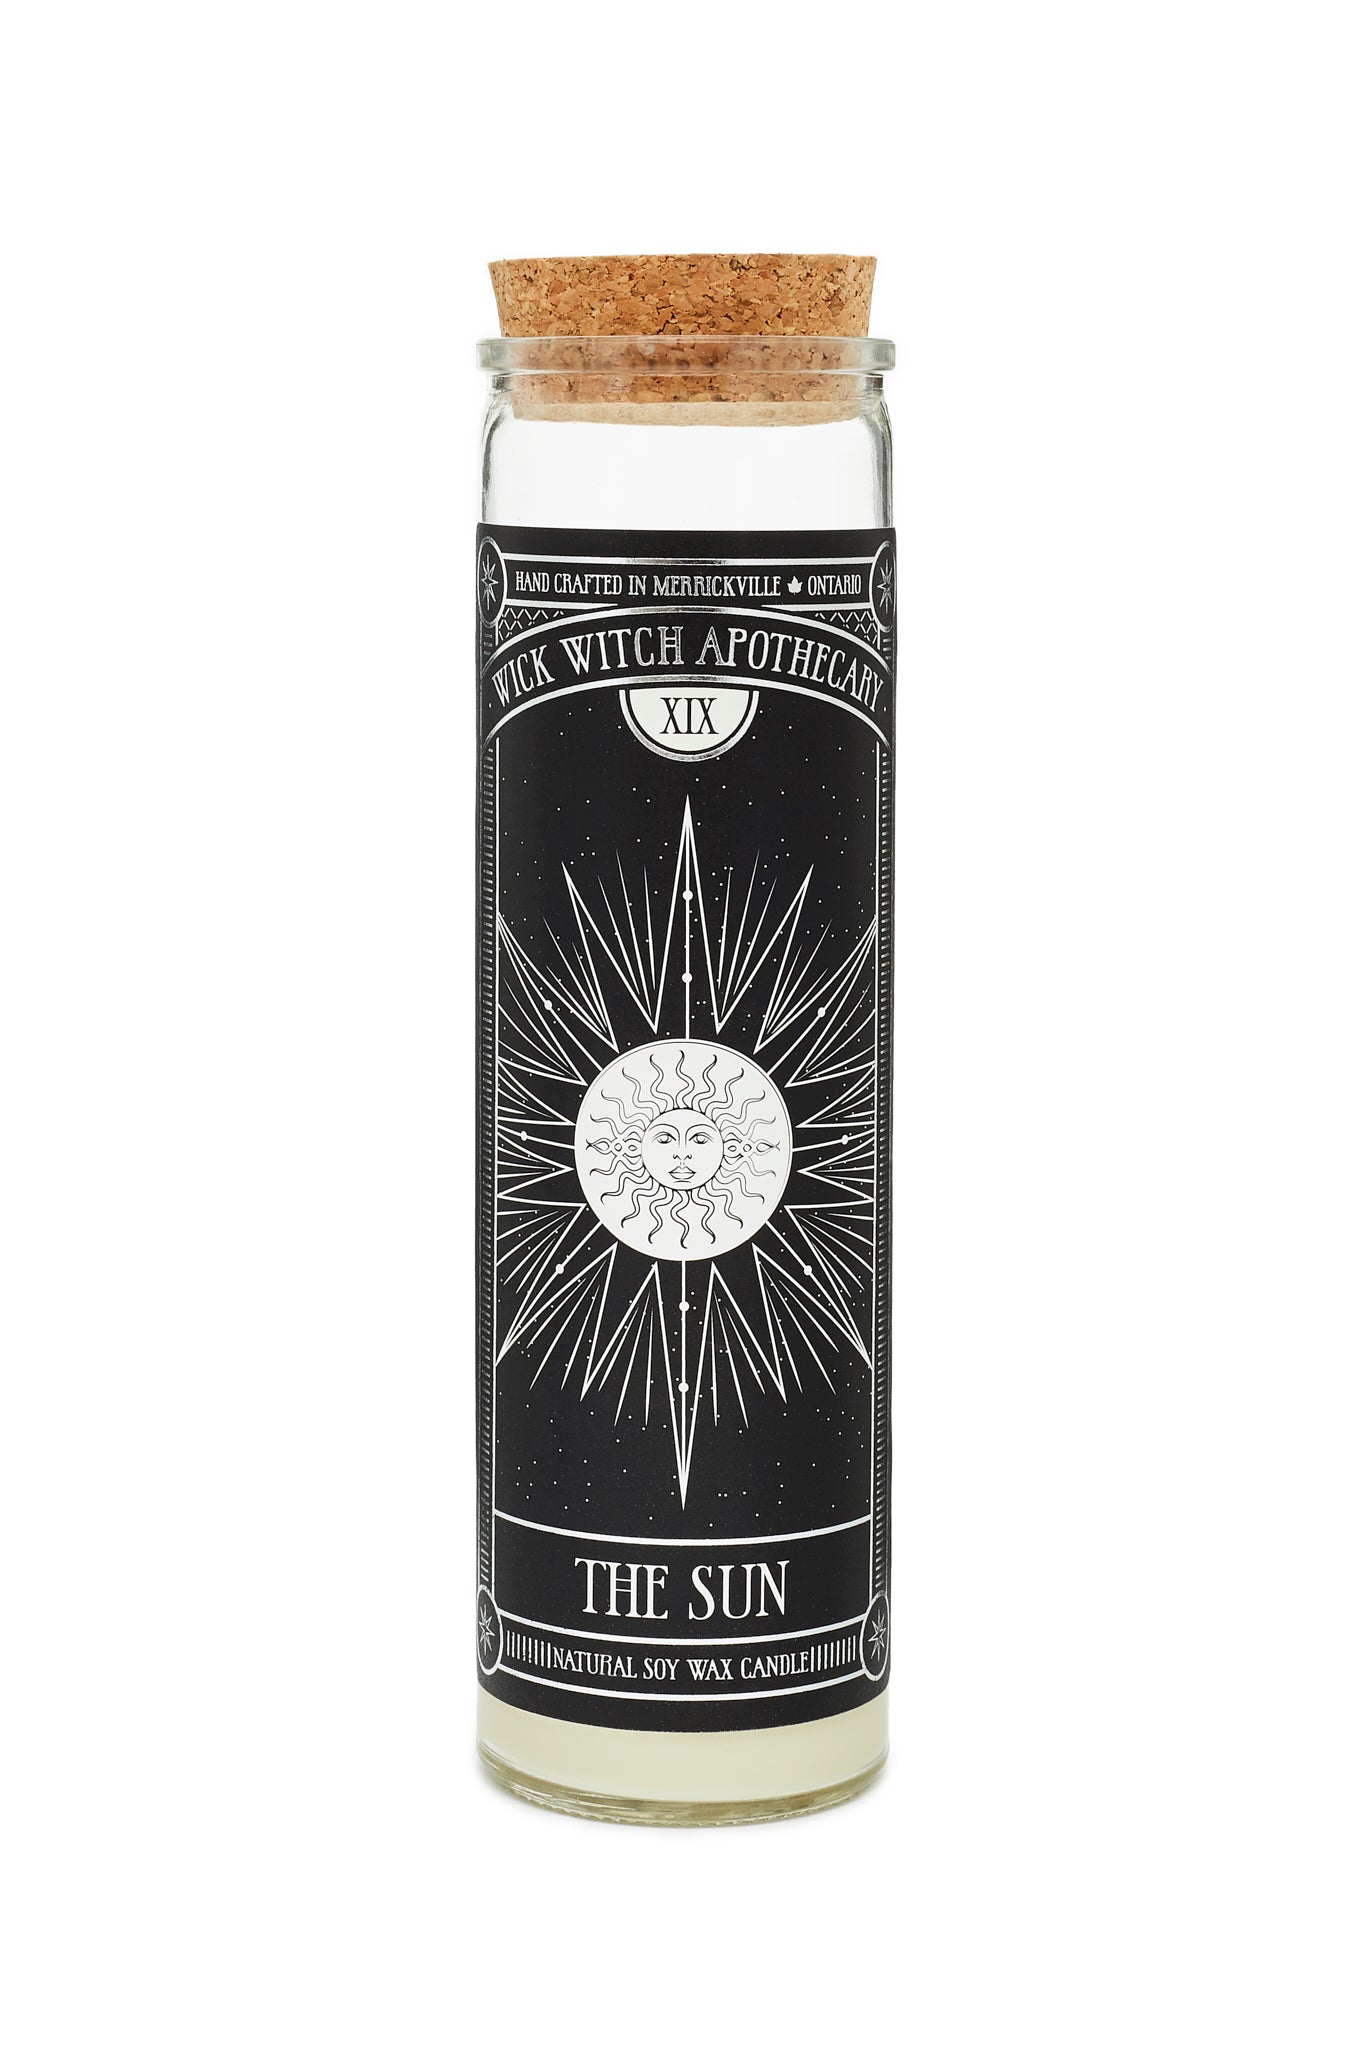 Wick Witch - The Sun Tarot Candle